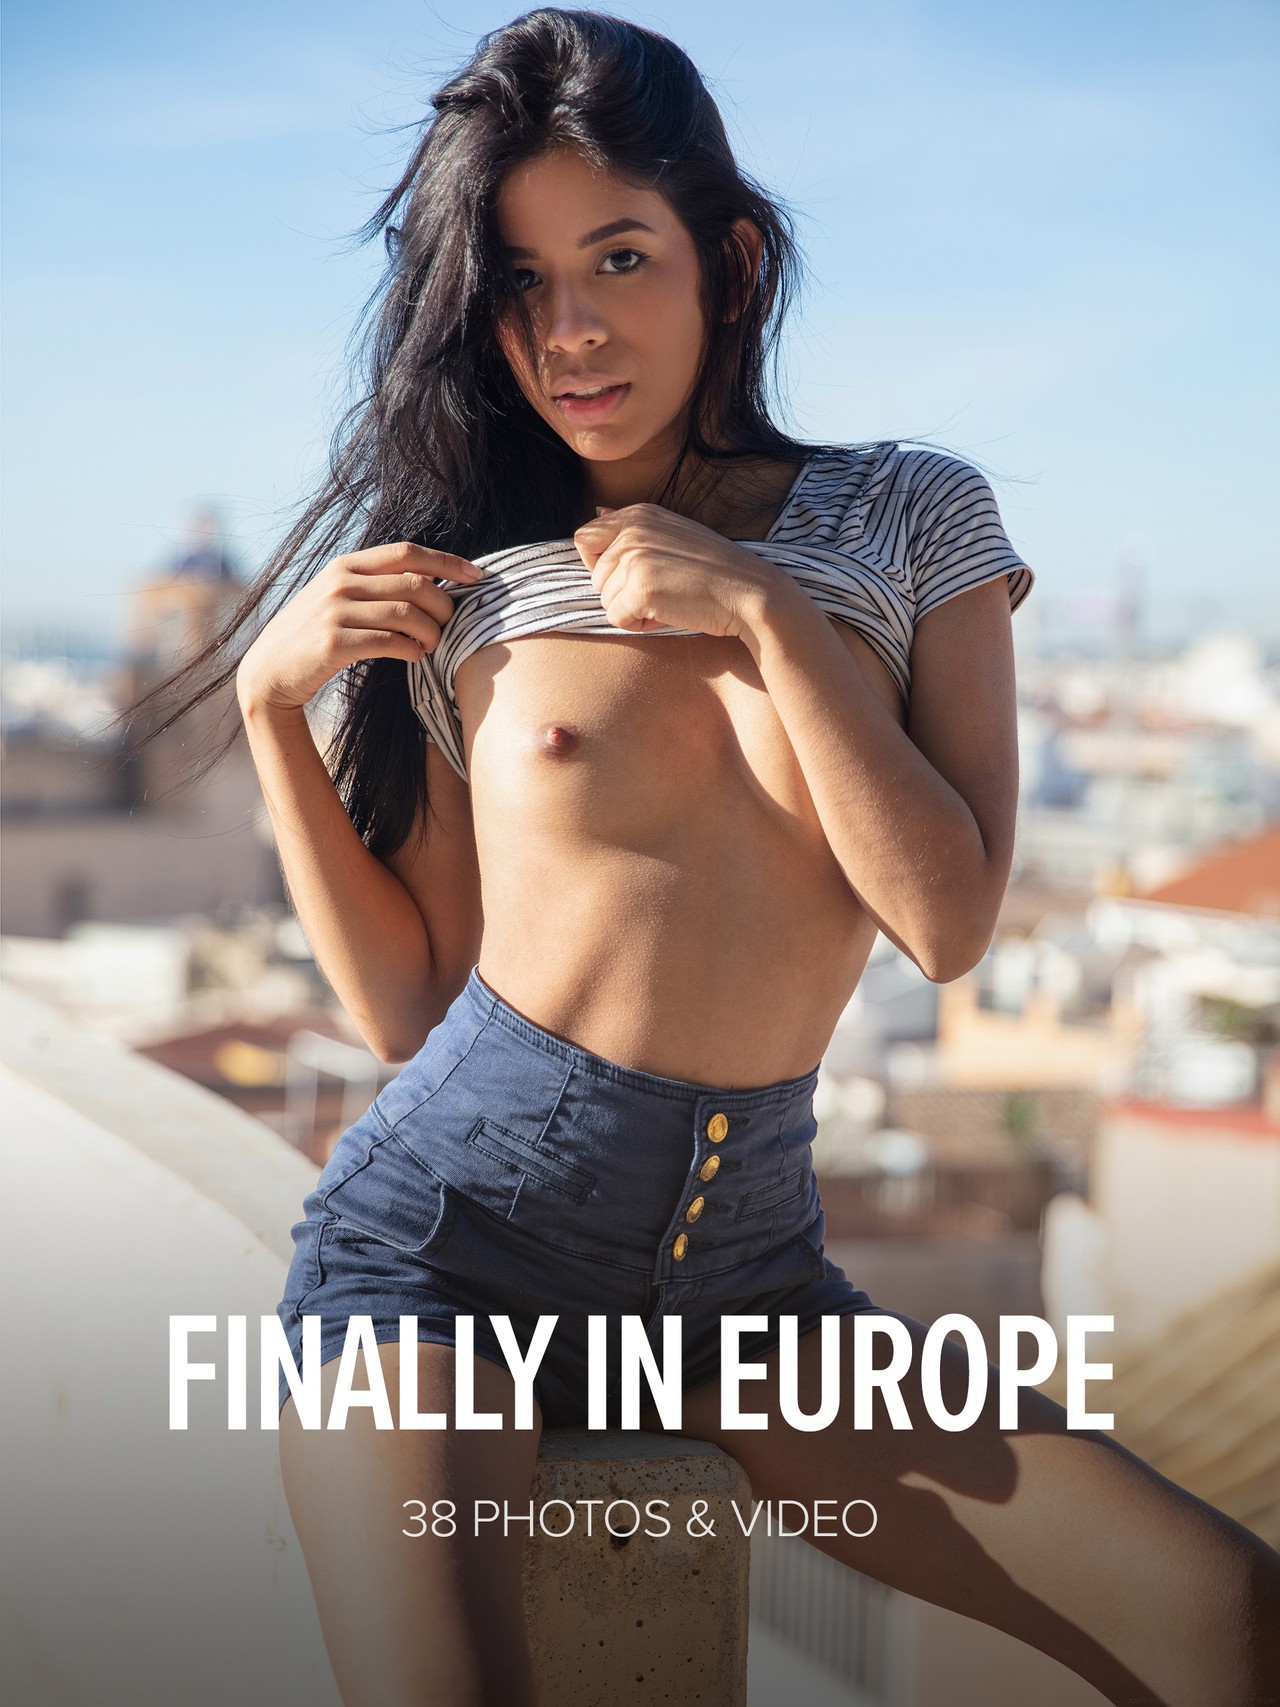 We have finally had the chance to meet beautiful Karin Torres from Venezuela right here in Europe, more precisely in southern Spain. This was just a very brief encounter, but we